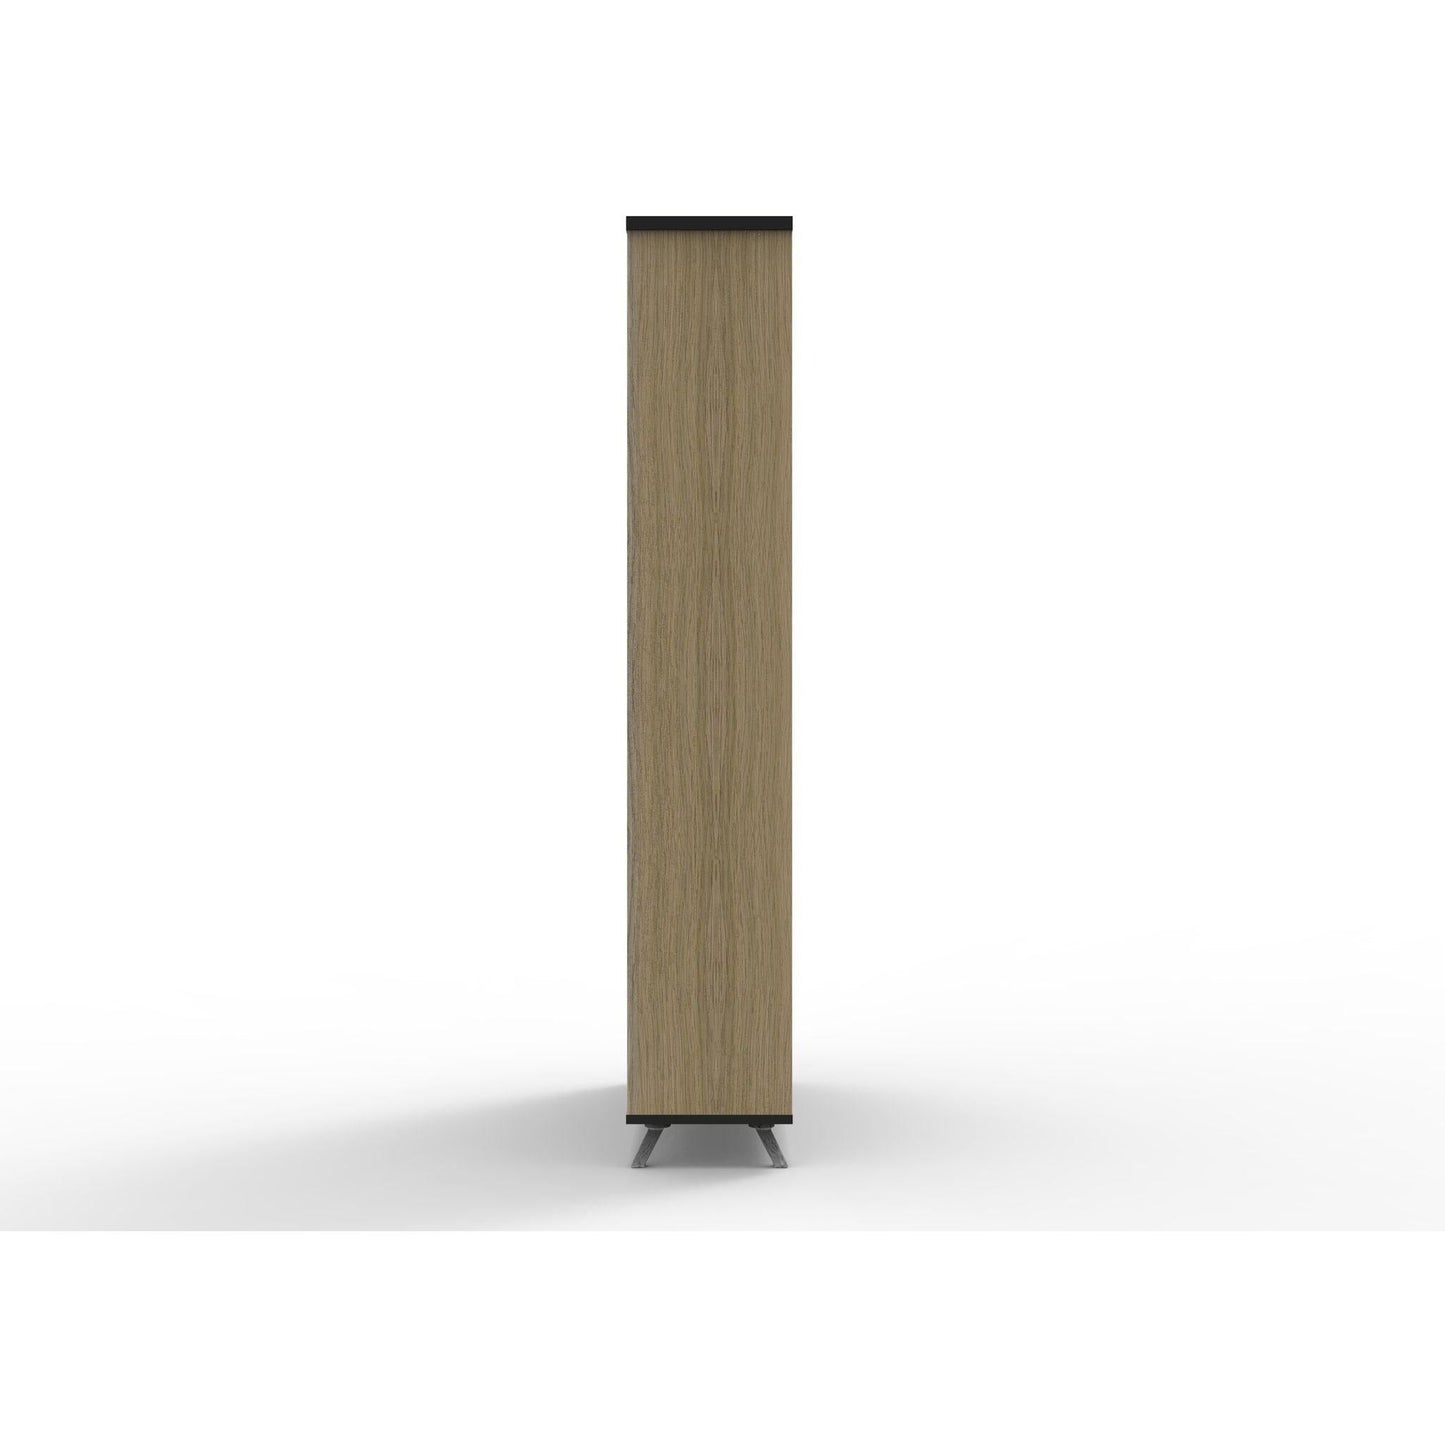 Infinity Book Case - Office Furniture Company 